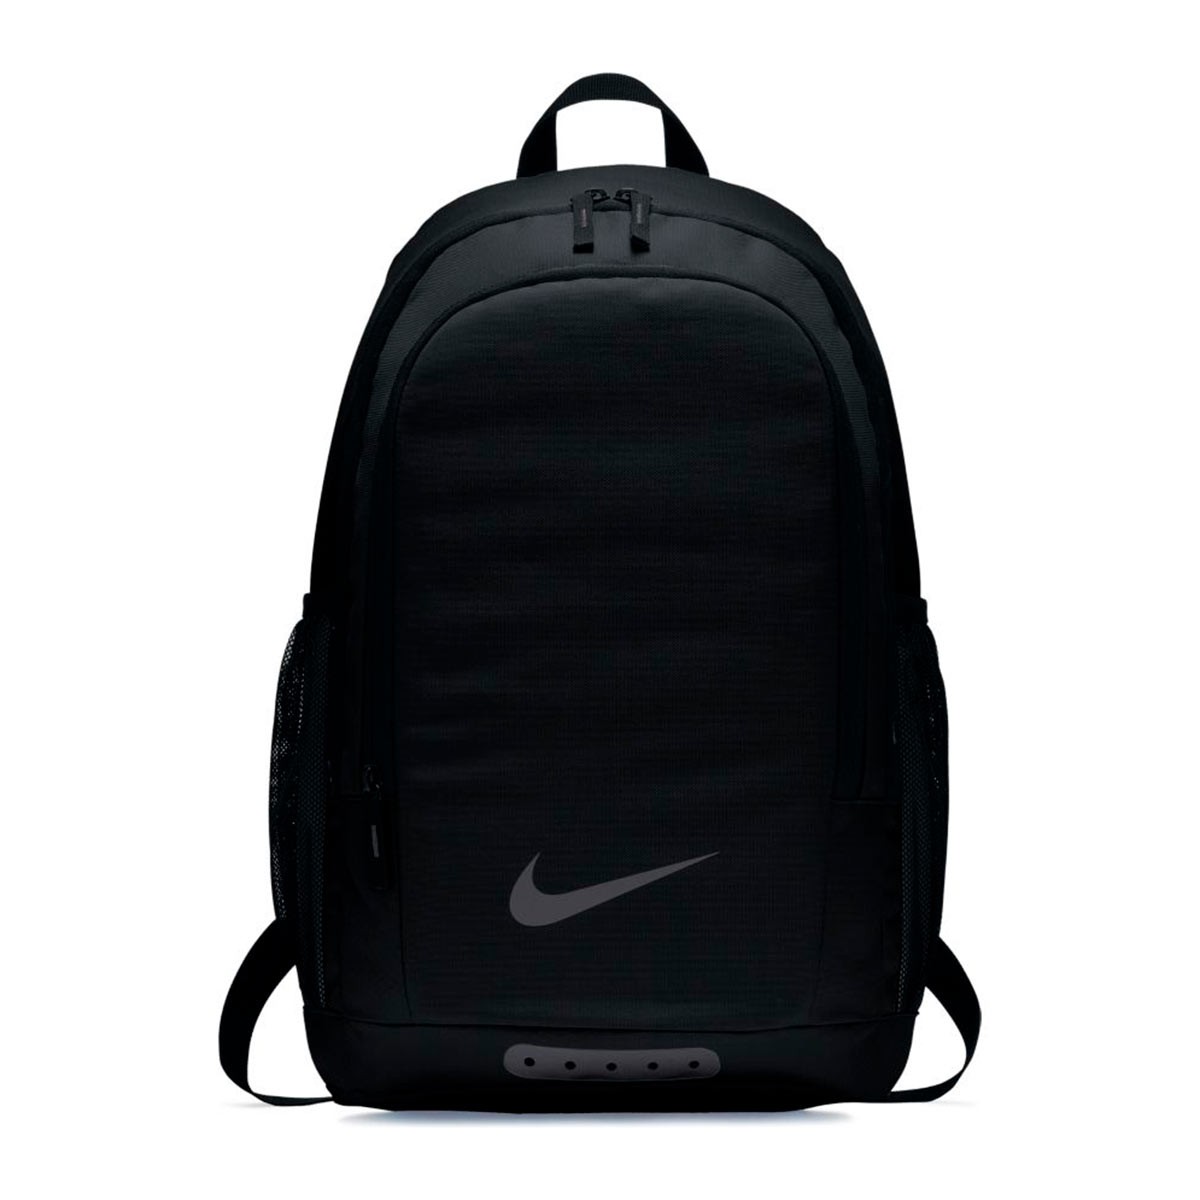 Backpack Nike Academy Football Black-Anthacite - Football store 